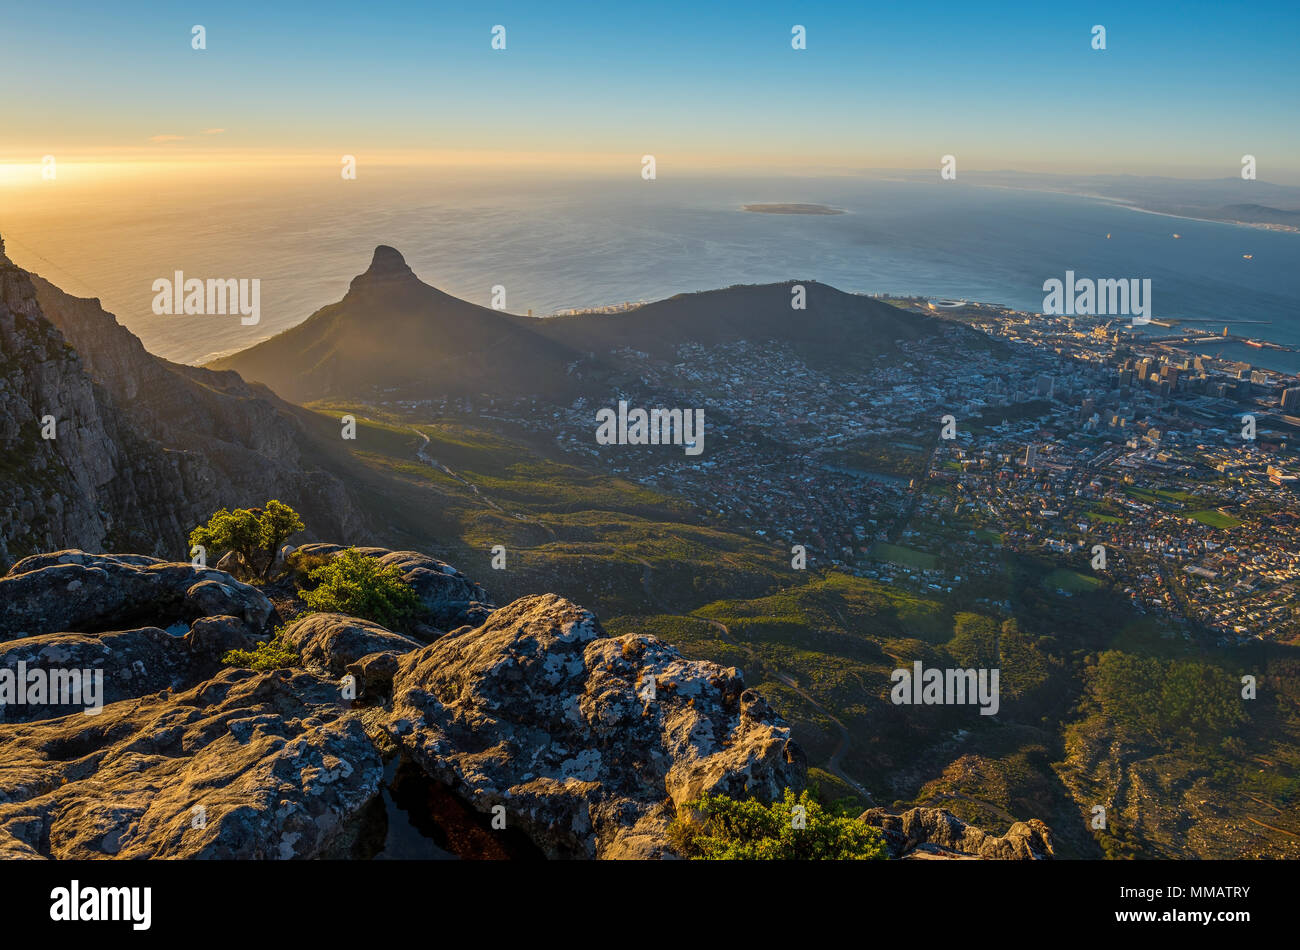 Sunset with aerial view over Cape Town and its urban skyline and the famous lion's head mountain peak as seen from the Table Mountain, South Africa. Stock Photo